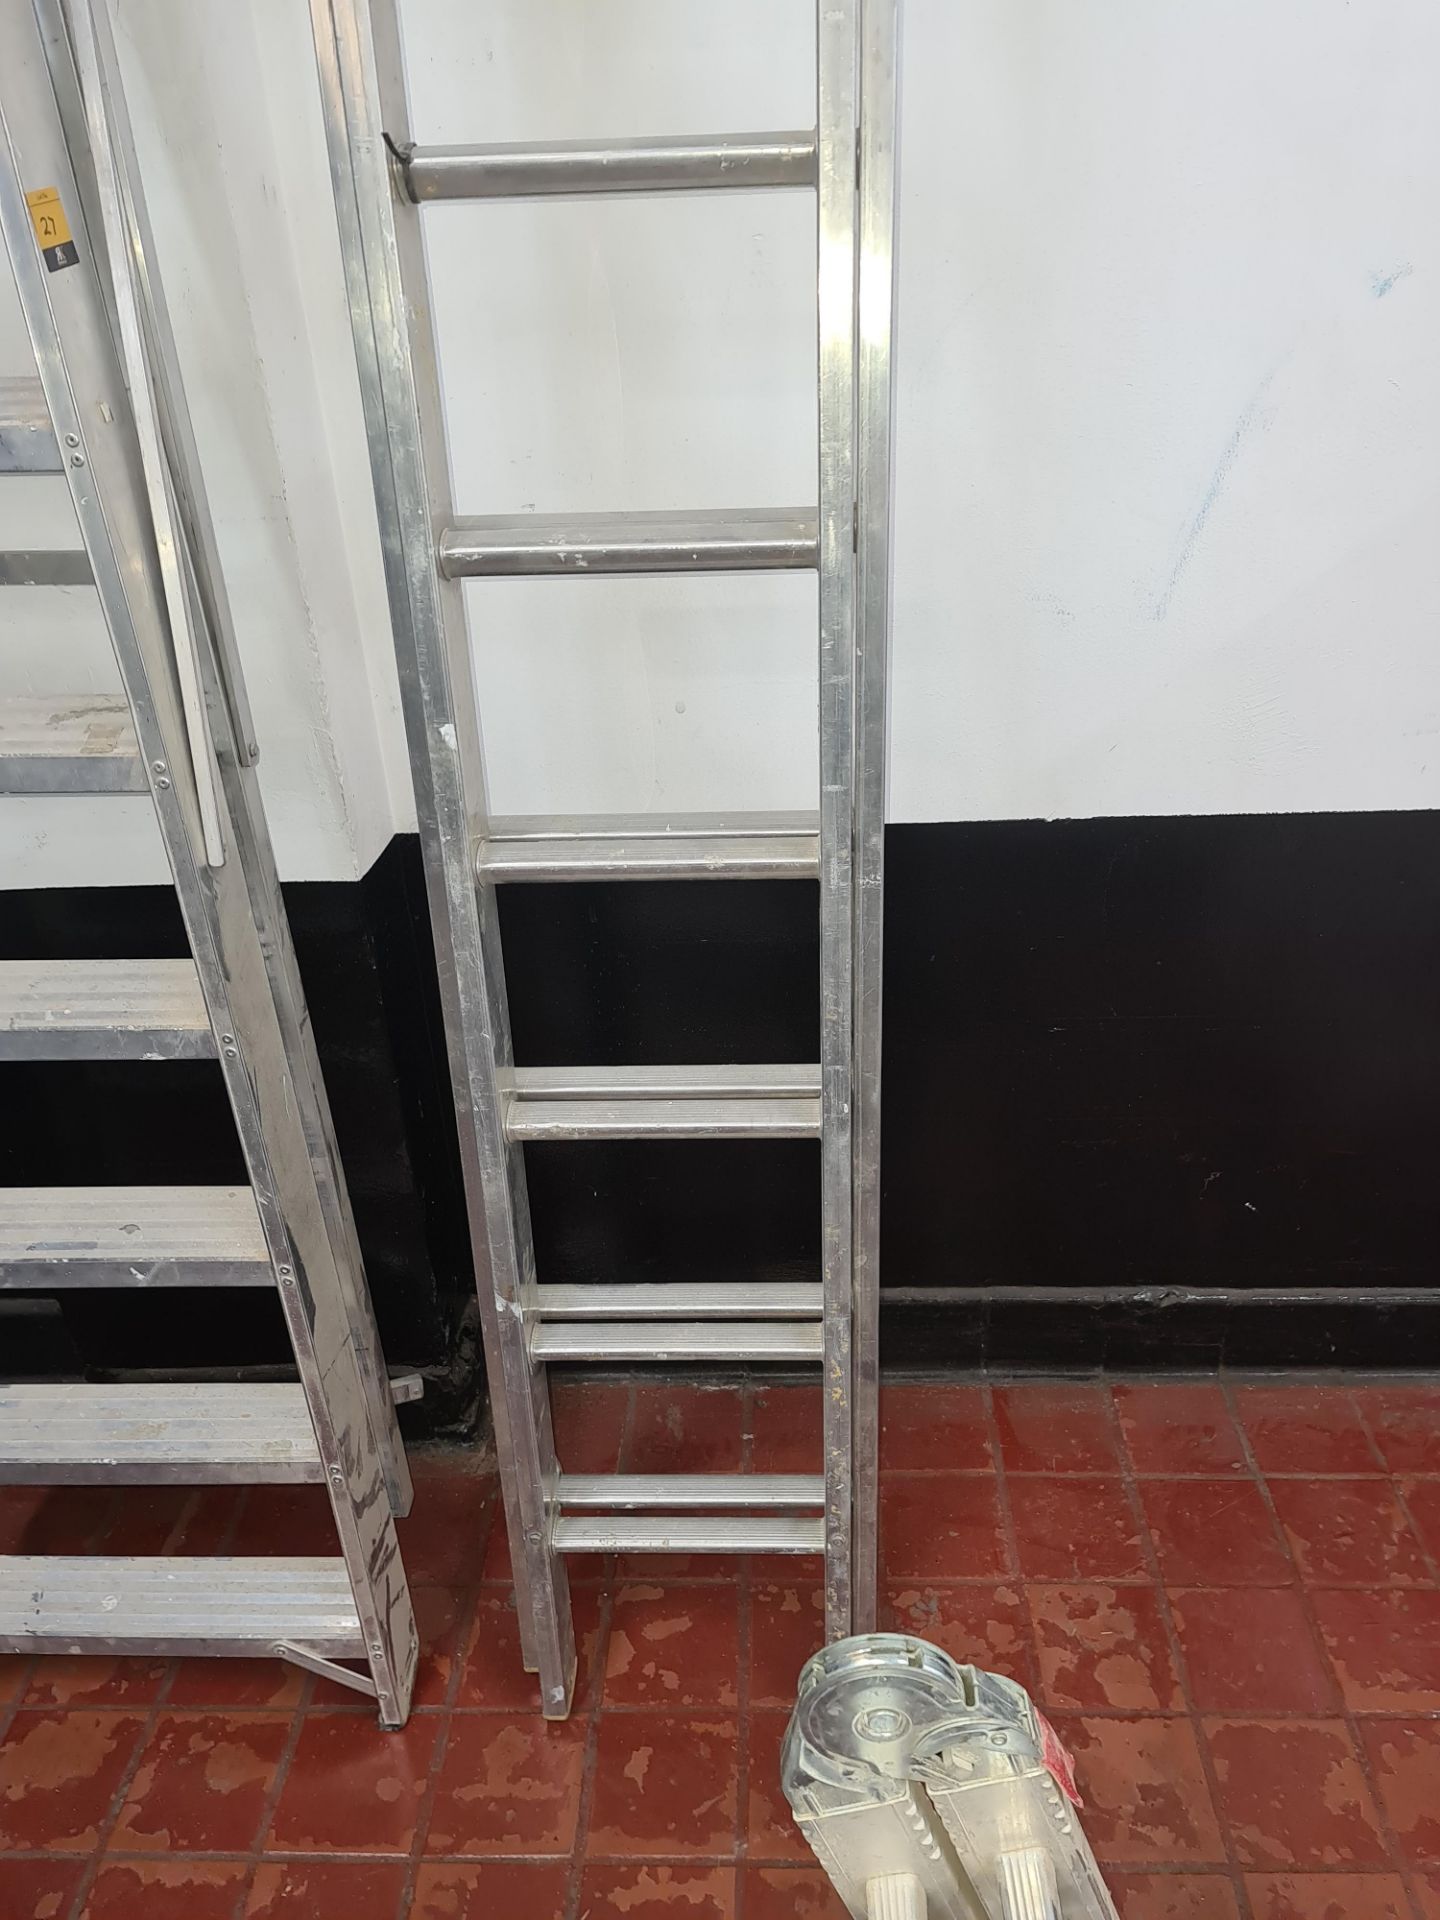 Set of double rung ladders, each length measuring approx. 11.5ft - Image 2 of 4